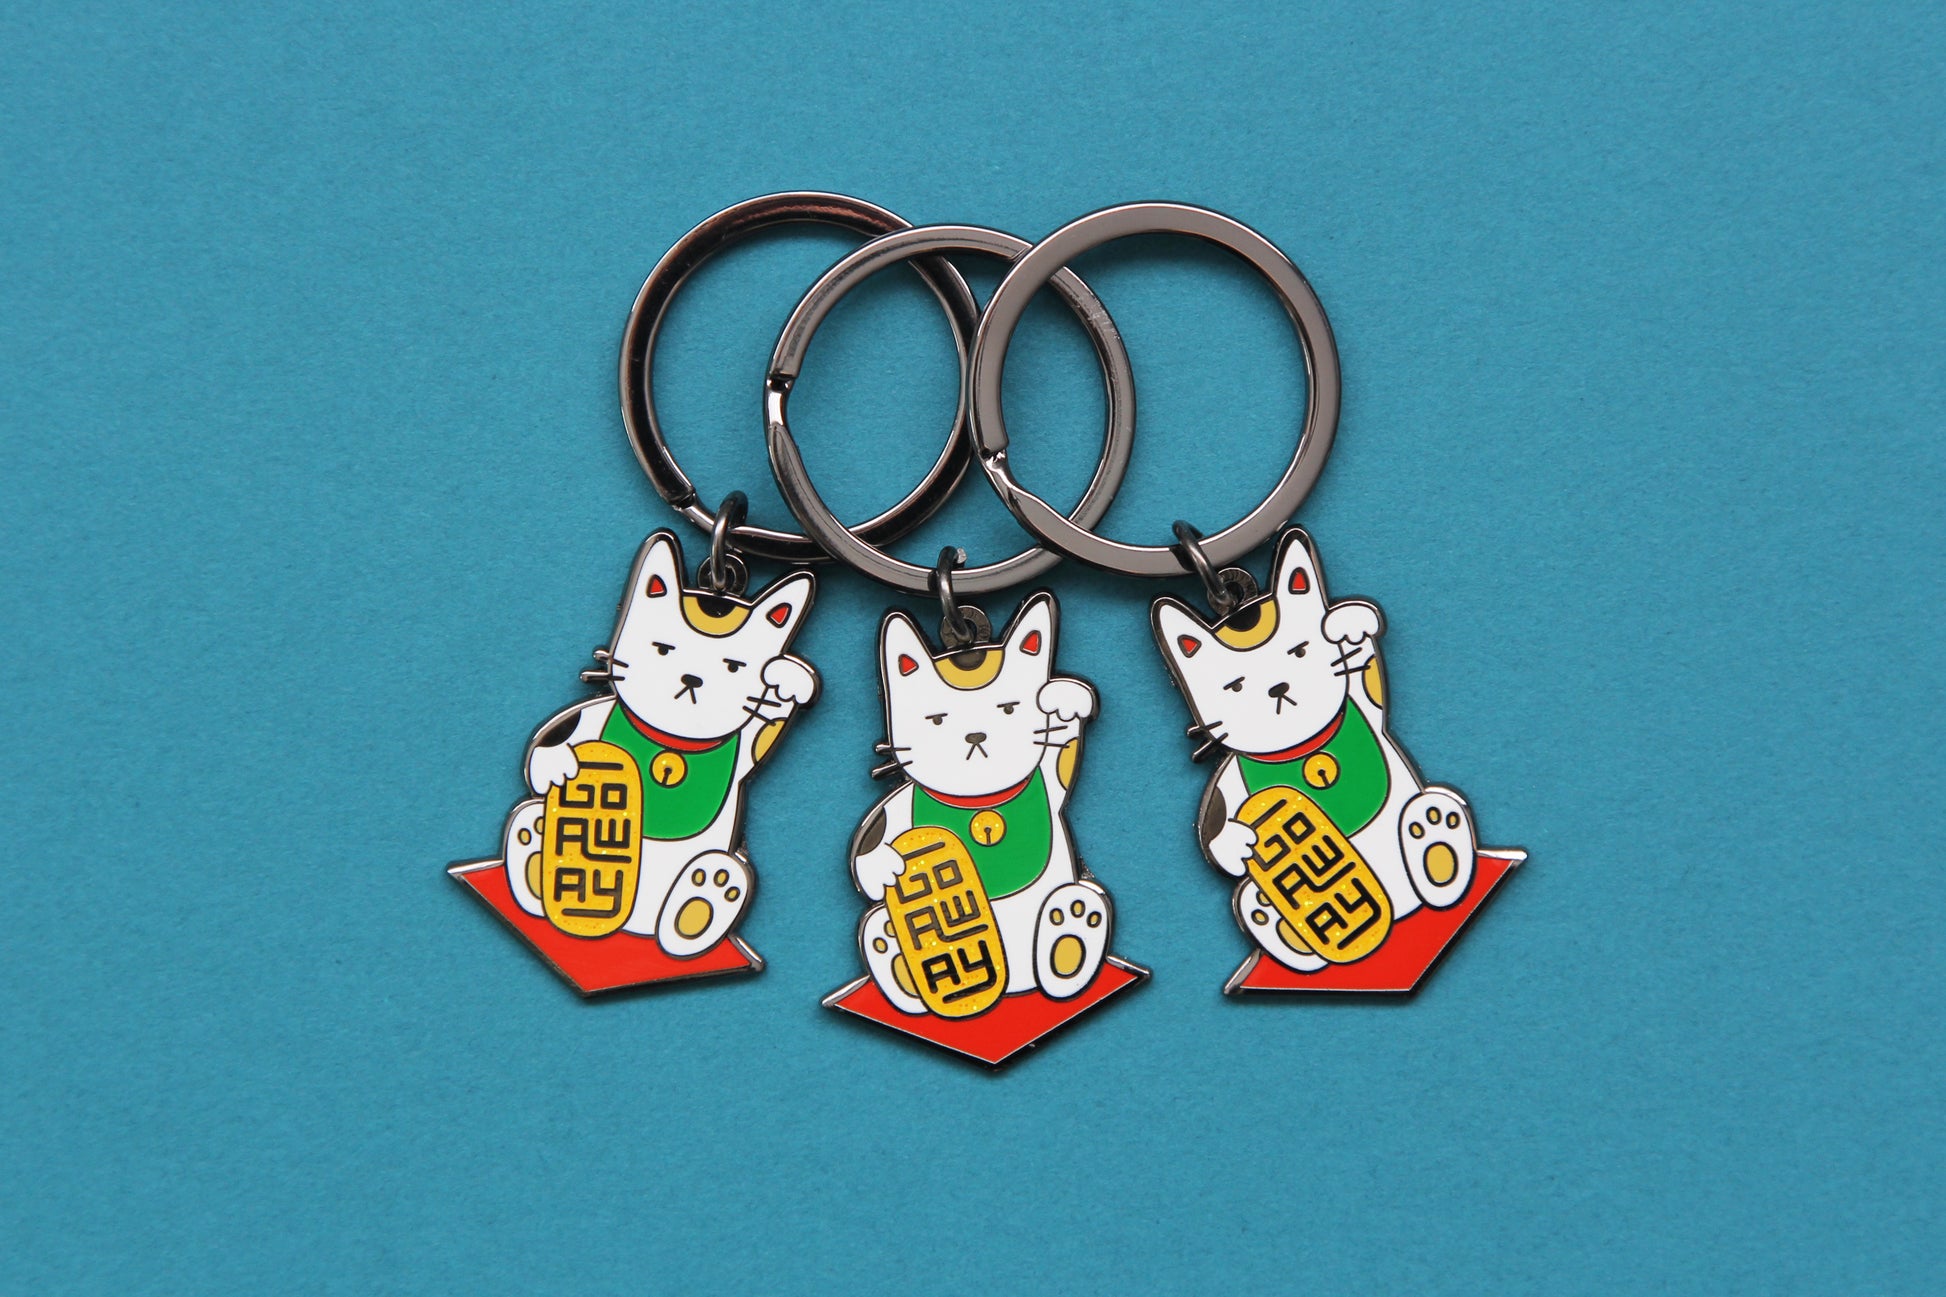 3 enamel keychains showing maneki neko cats holding glittery gold bars that say "Go Away" over a teal background.